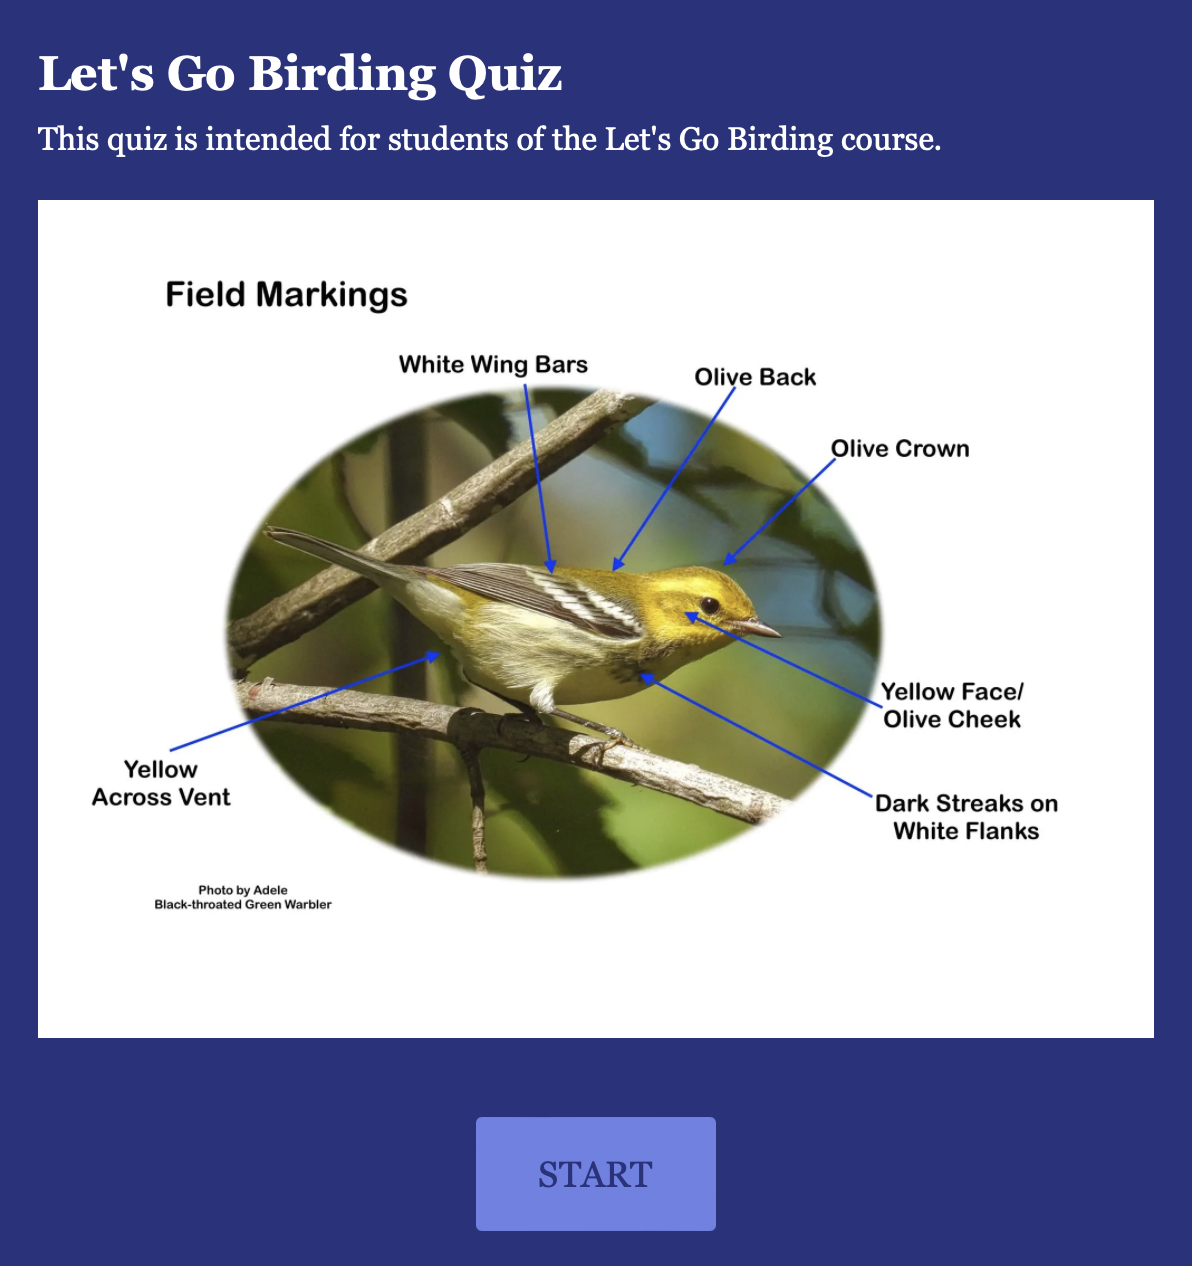 Test your knowledge with the Bird Quiz Page thumbnail